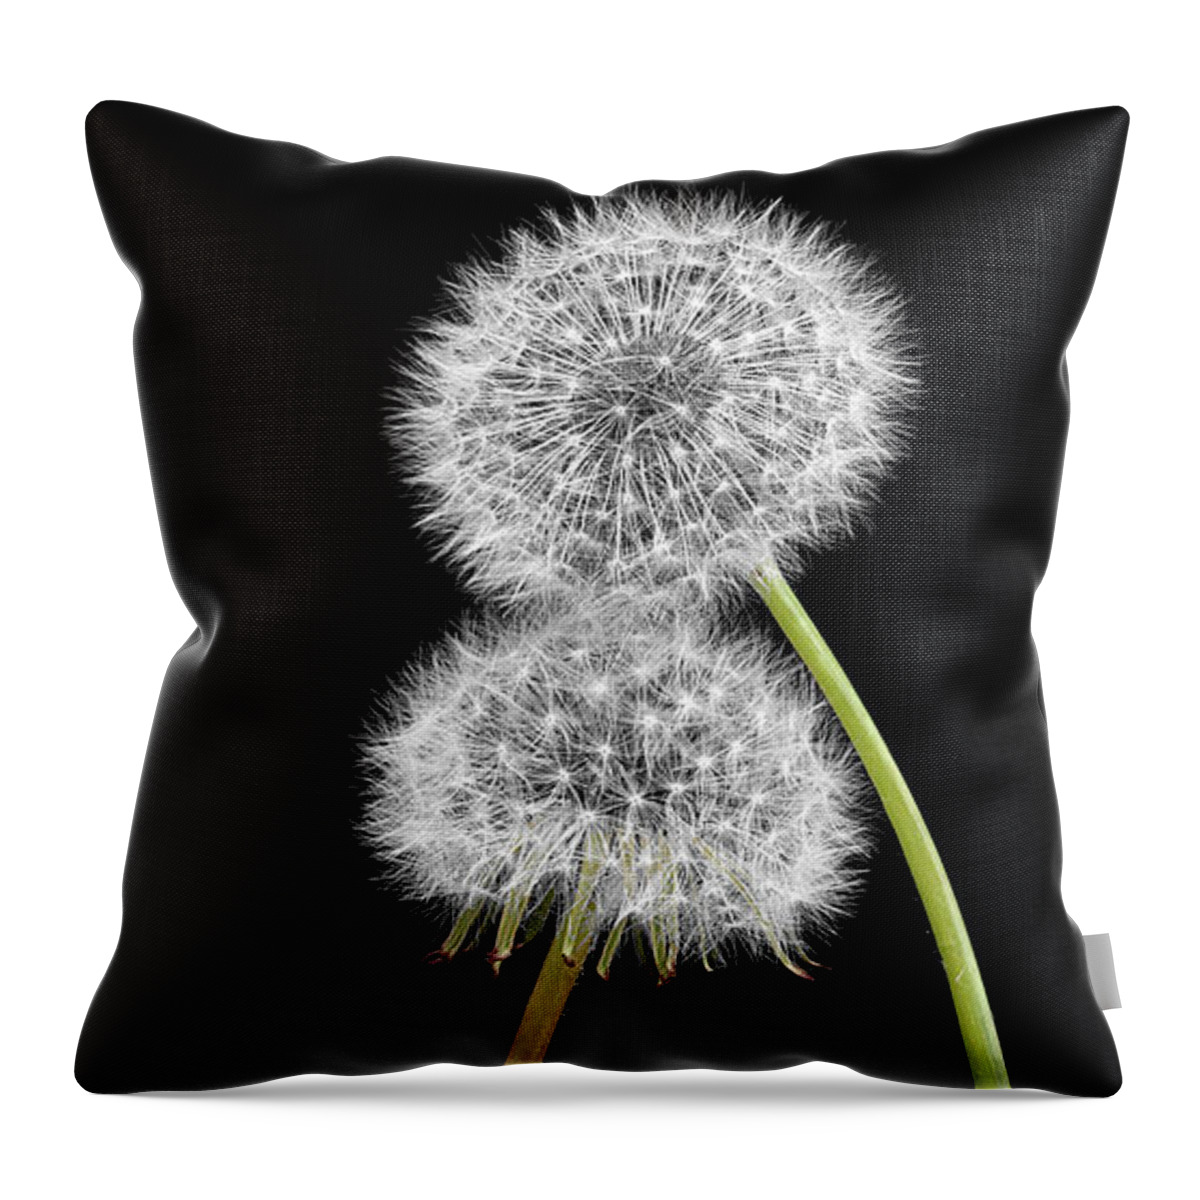 Two Couple Fluffy Dandelions Tender Touch Heads Passion Expressionistic Impersonation Uplifting Metaphoric Figurative Interpretative Singular Impression Evocative Romance Intrigue Fancy Minimalism Minimalist Peculiar Simplicity Simple Togetherness Creative Associative Impressions Contemporary Emotional Spiritual Happy Elegance Expressive Stylish Inspirational Romantic Charming Charm Aesthetic Poetic Funny Idyllic Meaningful Conceptual Sentimental Eccentric Provocative Weird Popular Bestseller Throw Pillow featuring the photograph TENDER TOUCH,TOGETHERNESS - impersonation OF two touching dandelions leaned to each other by Tatiana Bogracheva